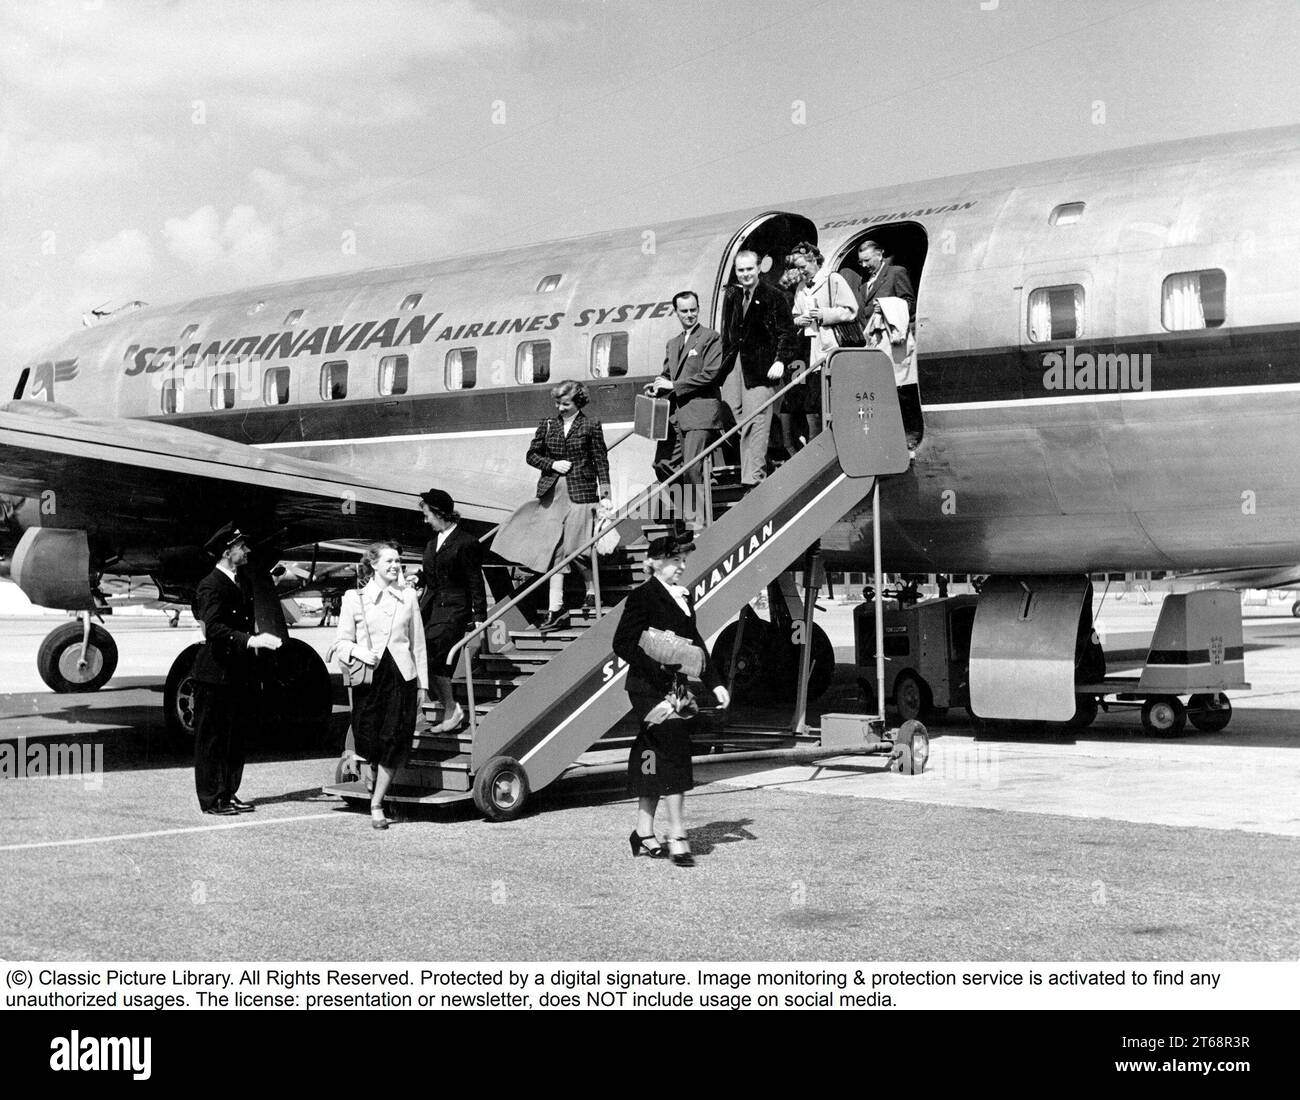 1950s airport. People are arriving by a Scandinavian airline system flight, walking down the stairs from the aircraft. Sweden 1955 Stock Photo